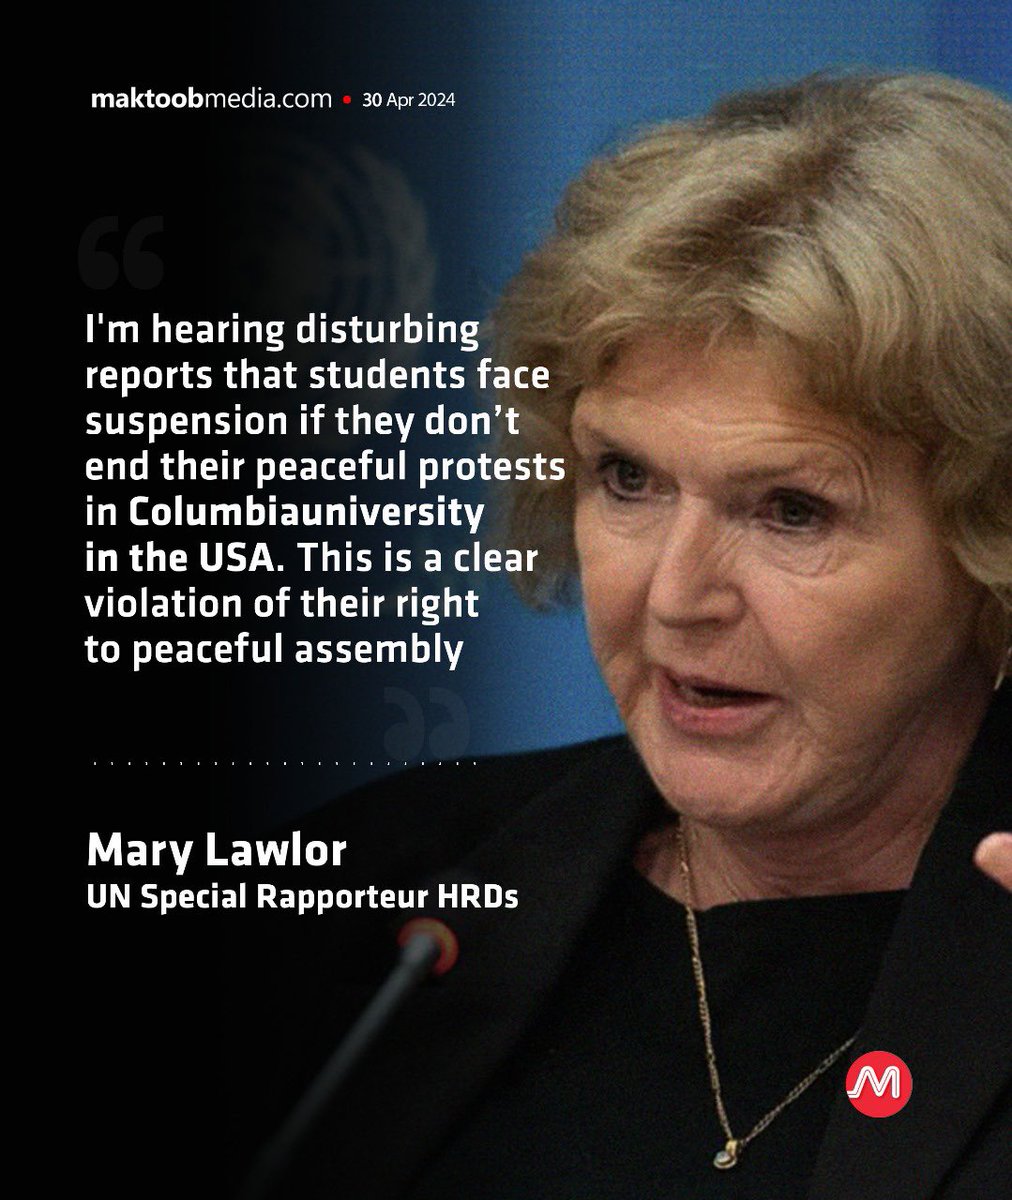 I'm hearing disturbing reports that students face suspension if they don’t end their peaceful protests in Columbia University in the USA. This is a clear violation of their right to peaceful assembly. Mary Lawlor UN Special Rapporteur HRDs